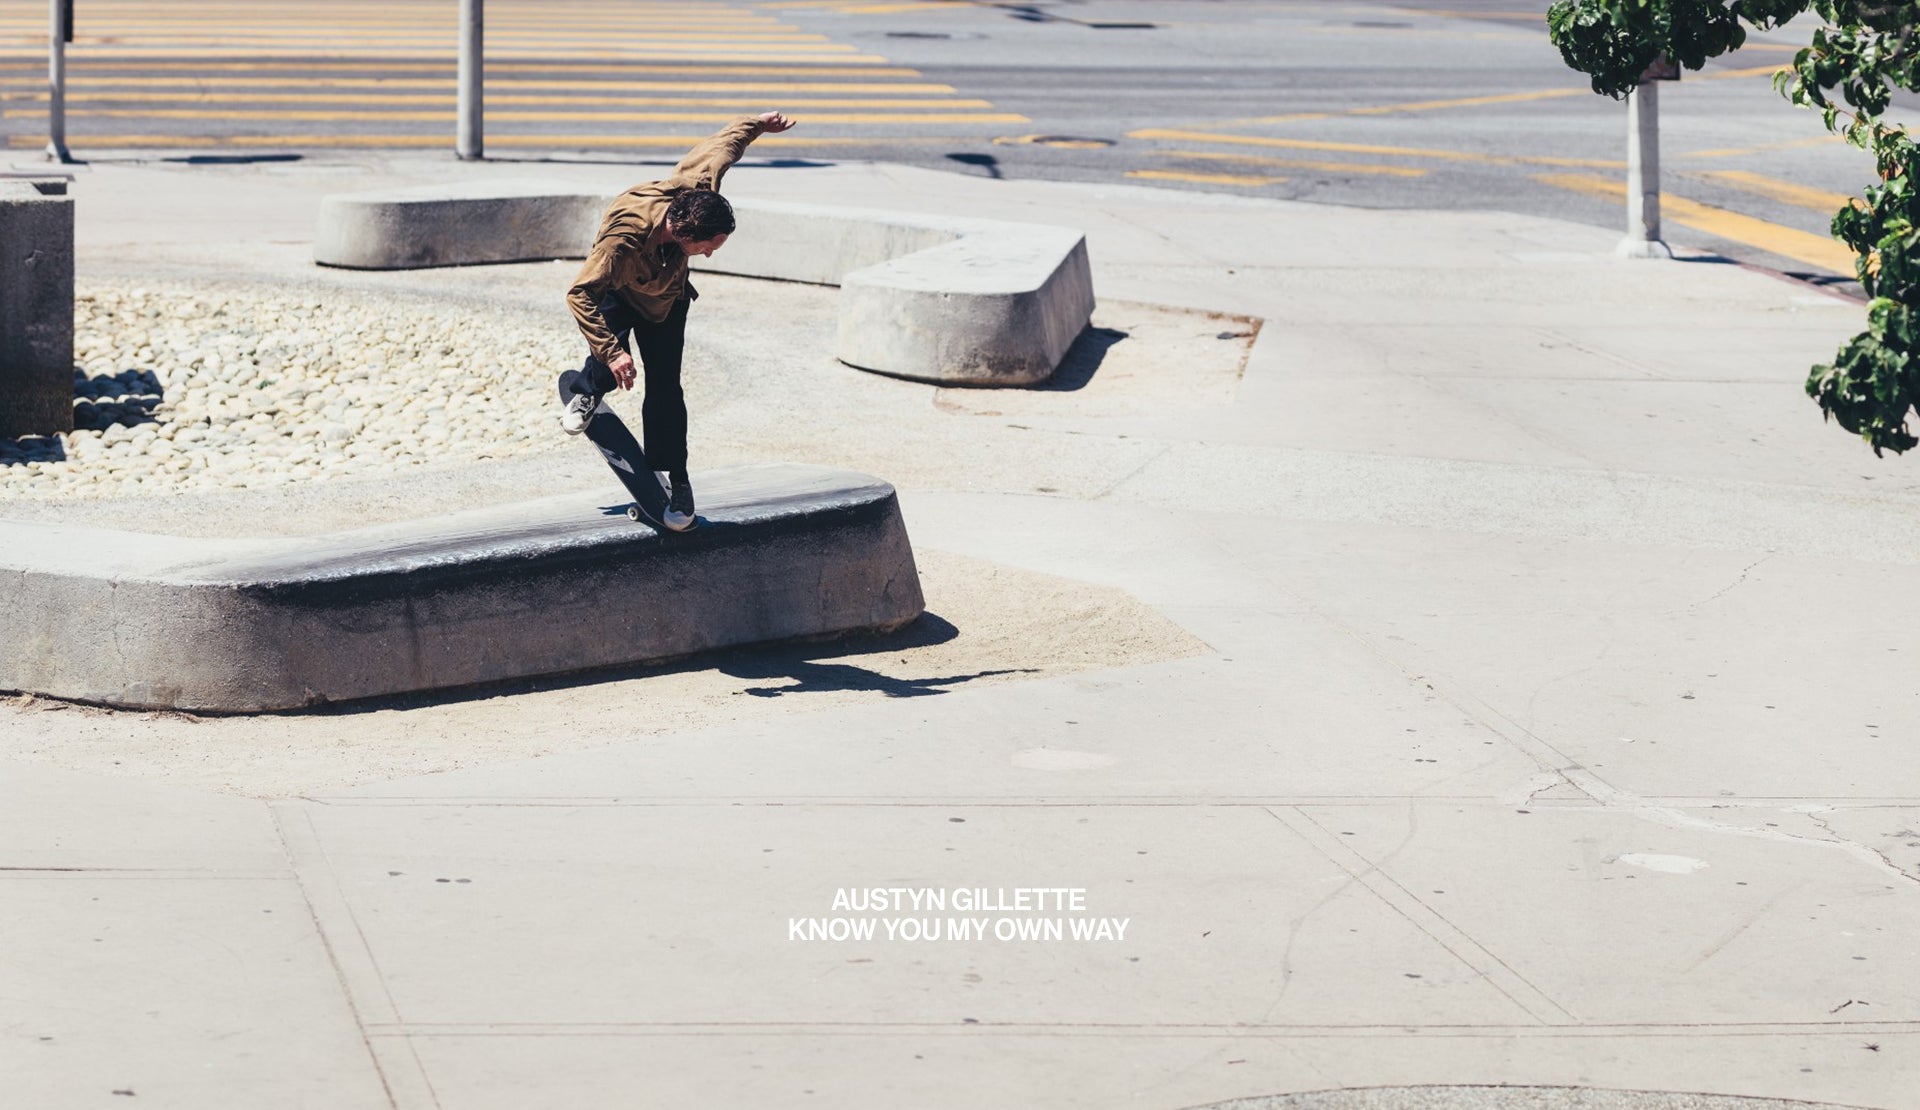 Load video: Austyn Gillette &quot;Know You My Own Way&quot; skate part